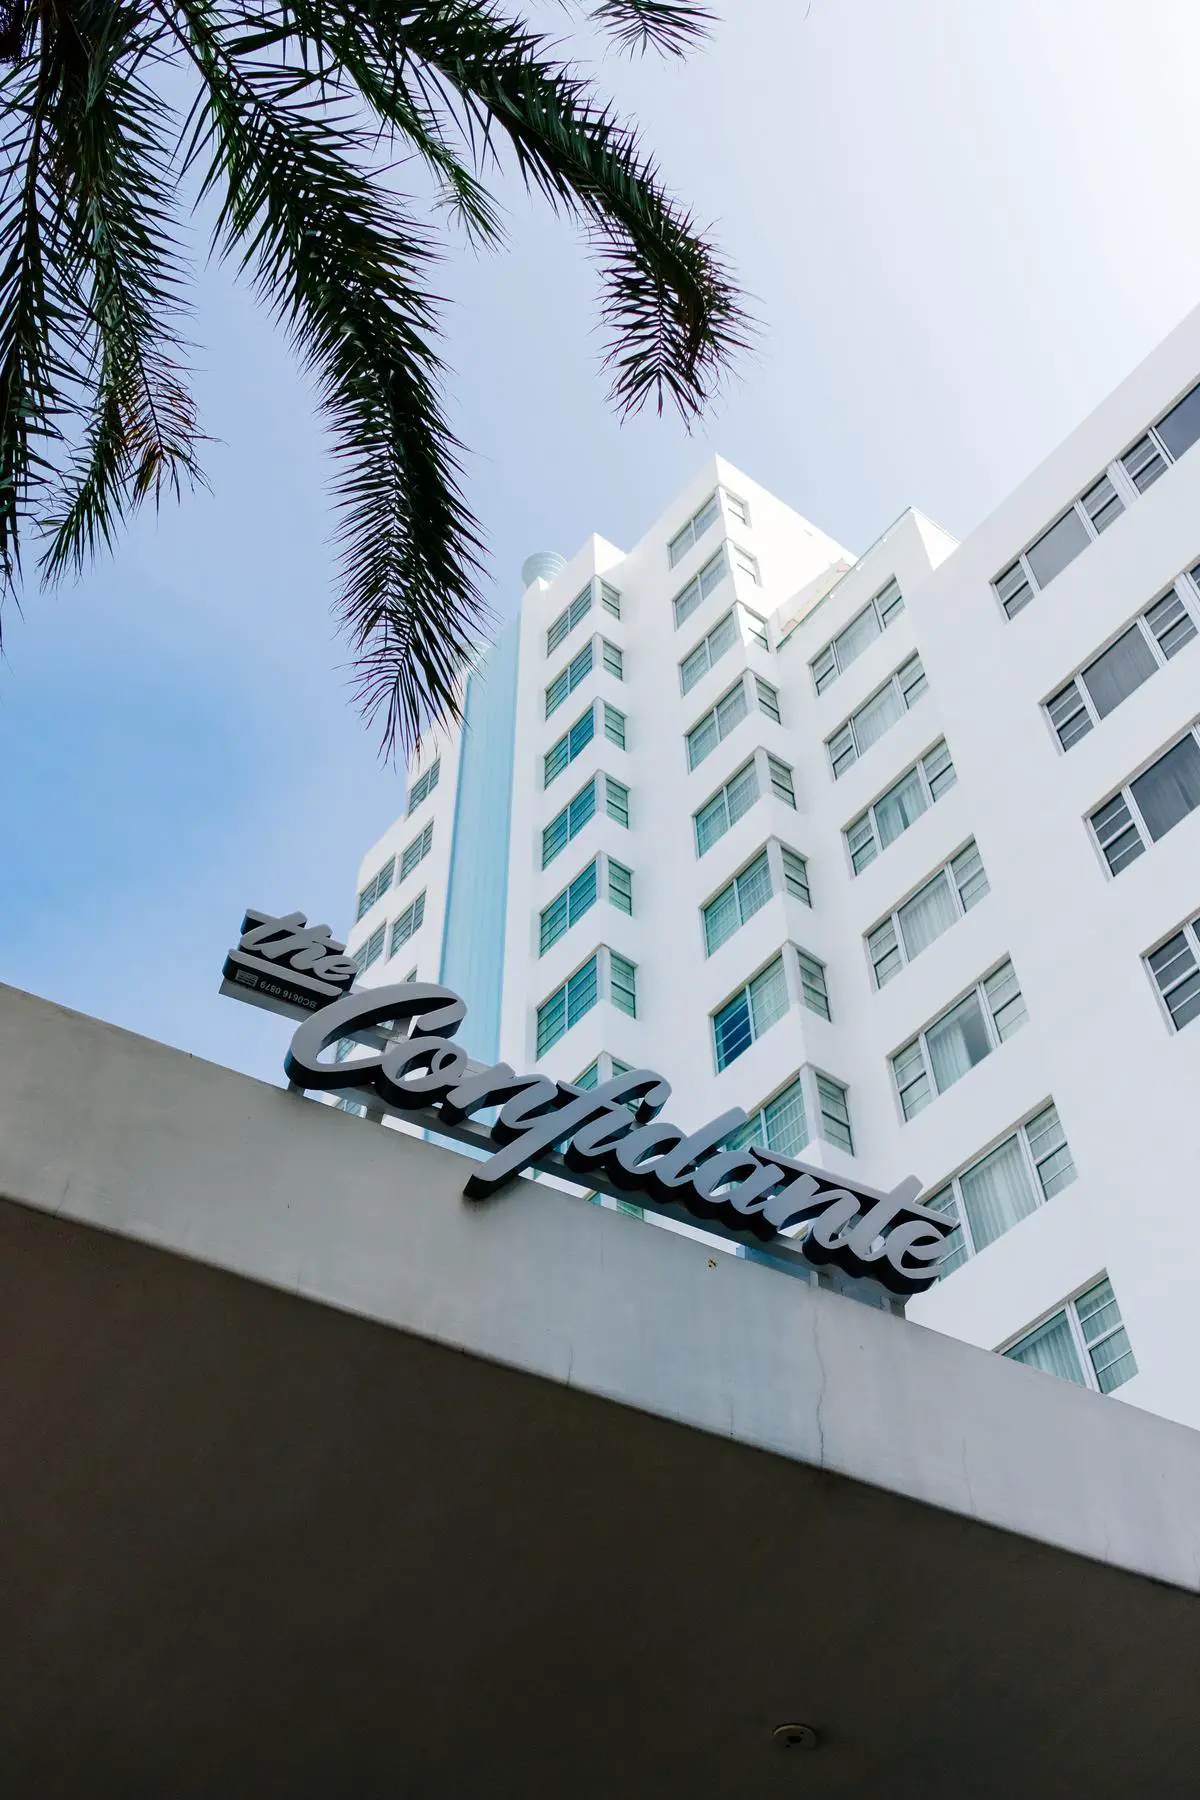 A photo of Kimpton Hotel Palomar San Diego, showcasing the building's exterior with palm trees in front and the name written in large letters.